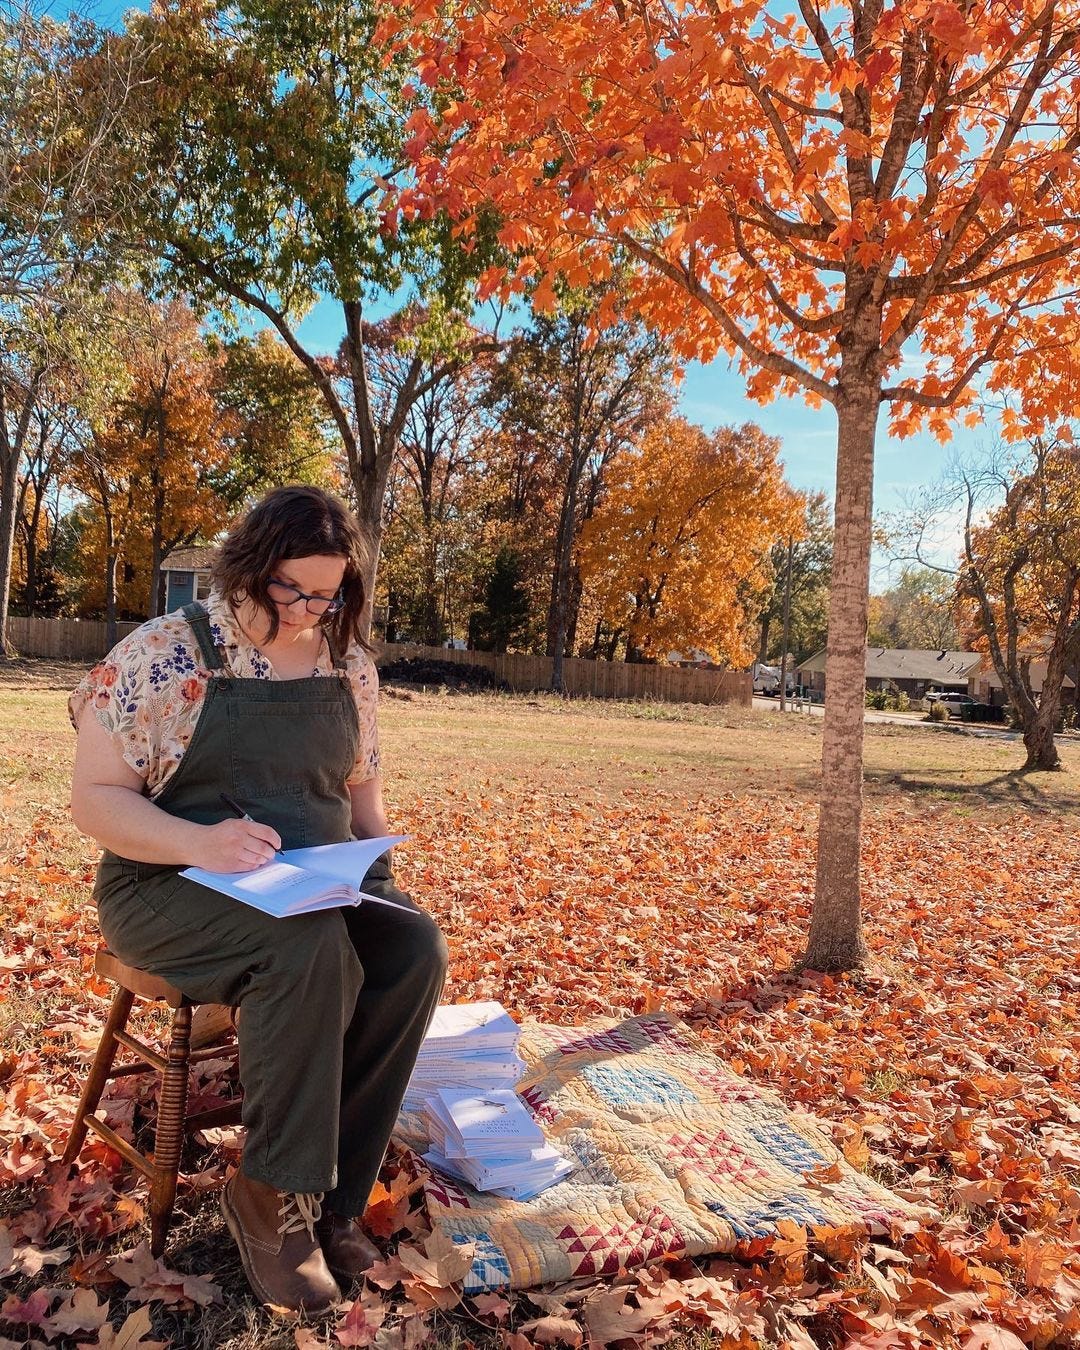 I'm sitting under an orange maple tree wearing olive overalls and signing a stack of books. I have pale skin, short brown. hair, and green glasses.